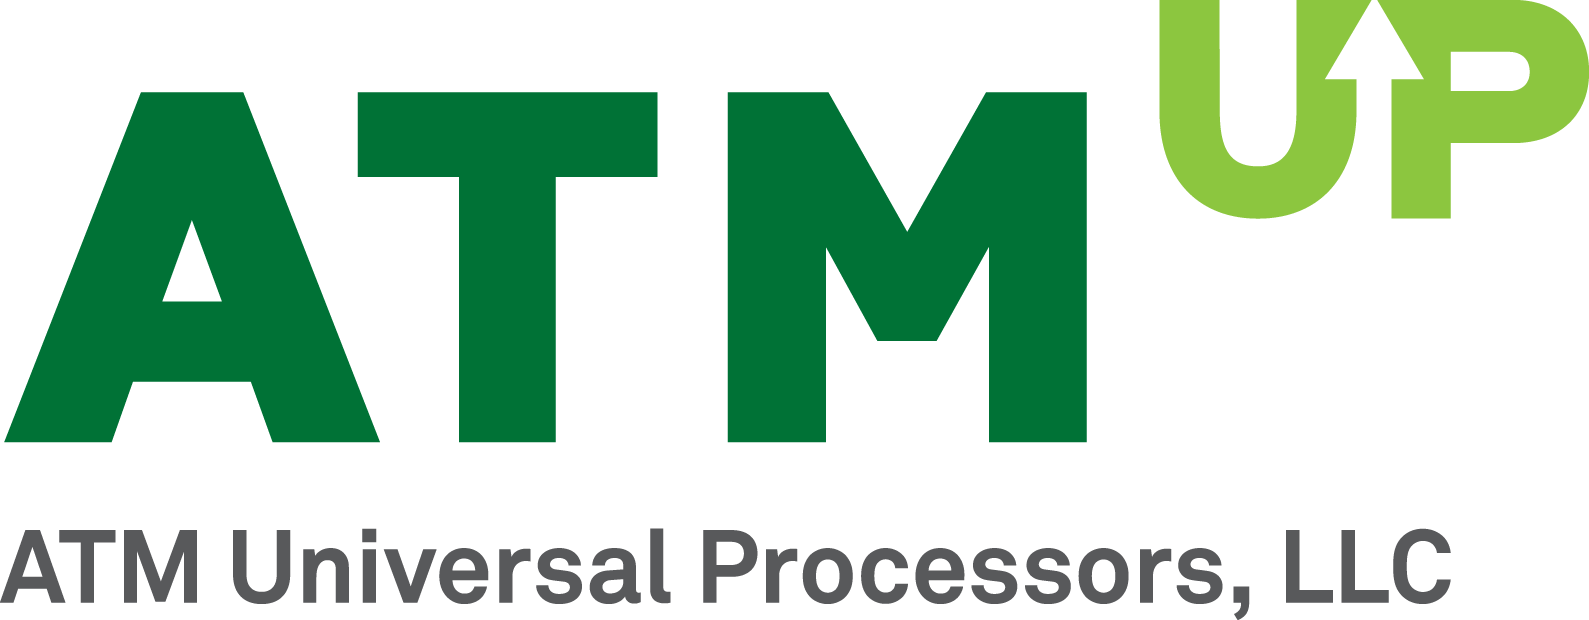 A black and green logo for the itm.